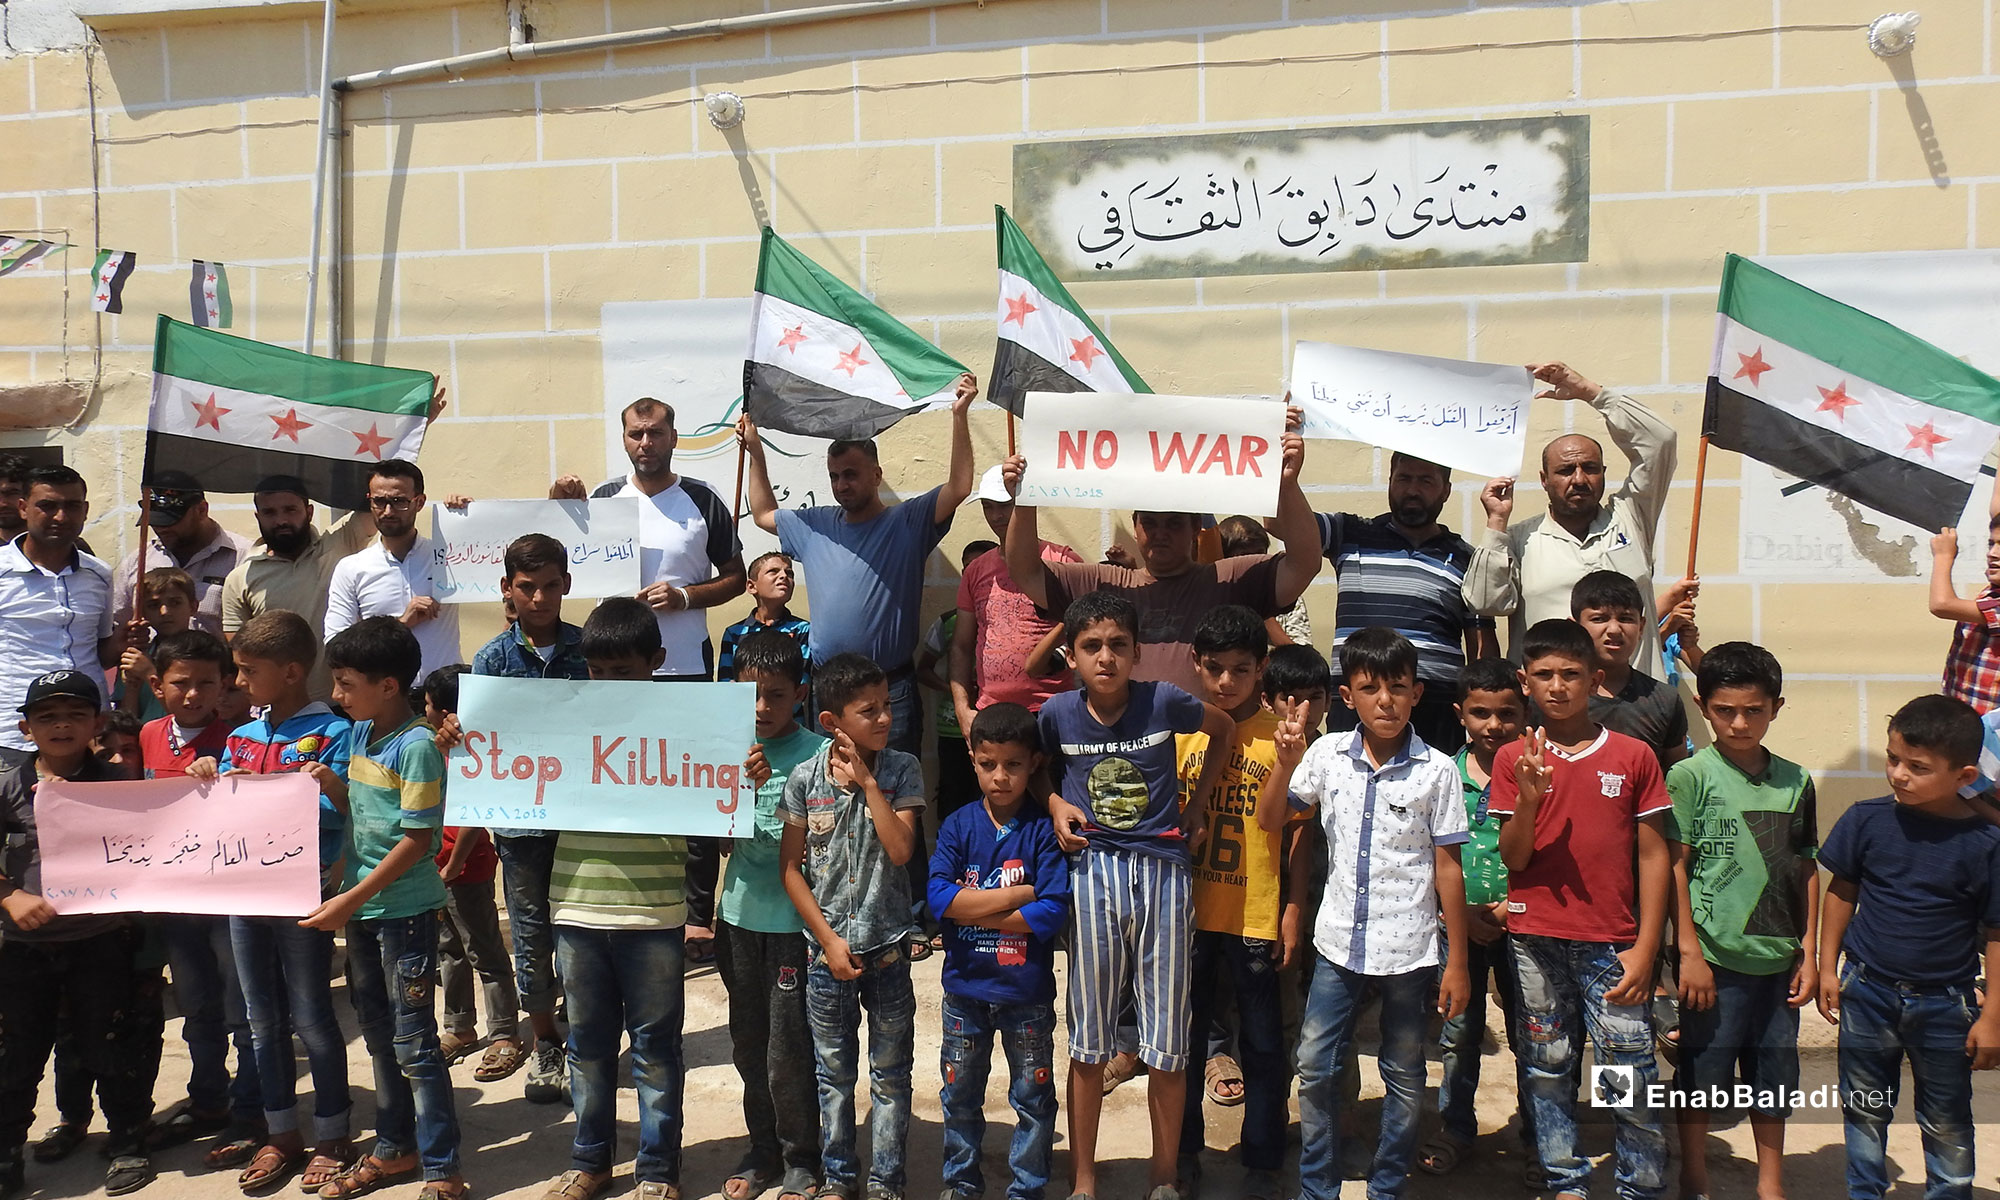 A Sit-in in the town of Dabiq protesting the violations of Syrian detainees’ rights, northern rural Aleppo (Signs in Arabic say: Stop killing, we want to build a homeland, the world’s silence is a dagger killing us) – August 2, 2018 (Enab Baladi)